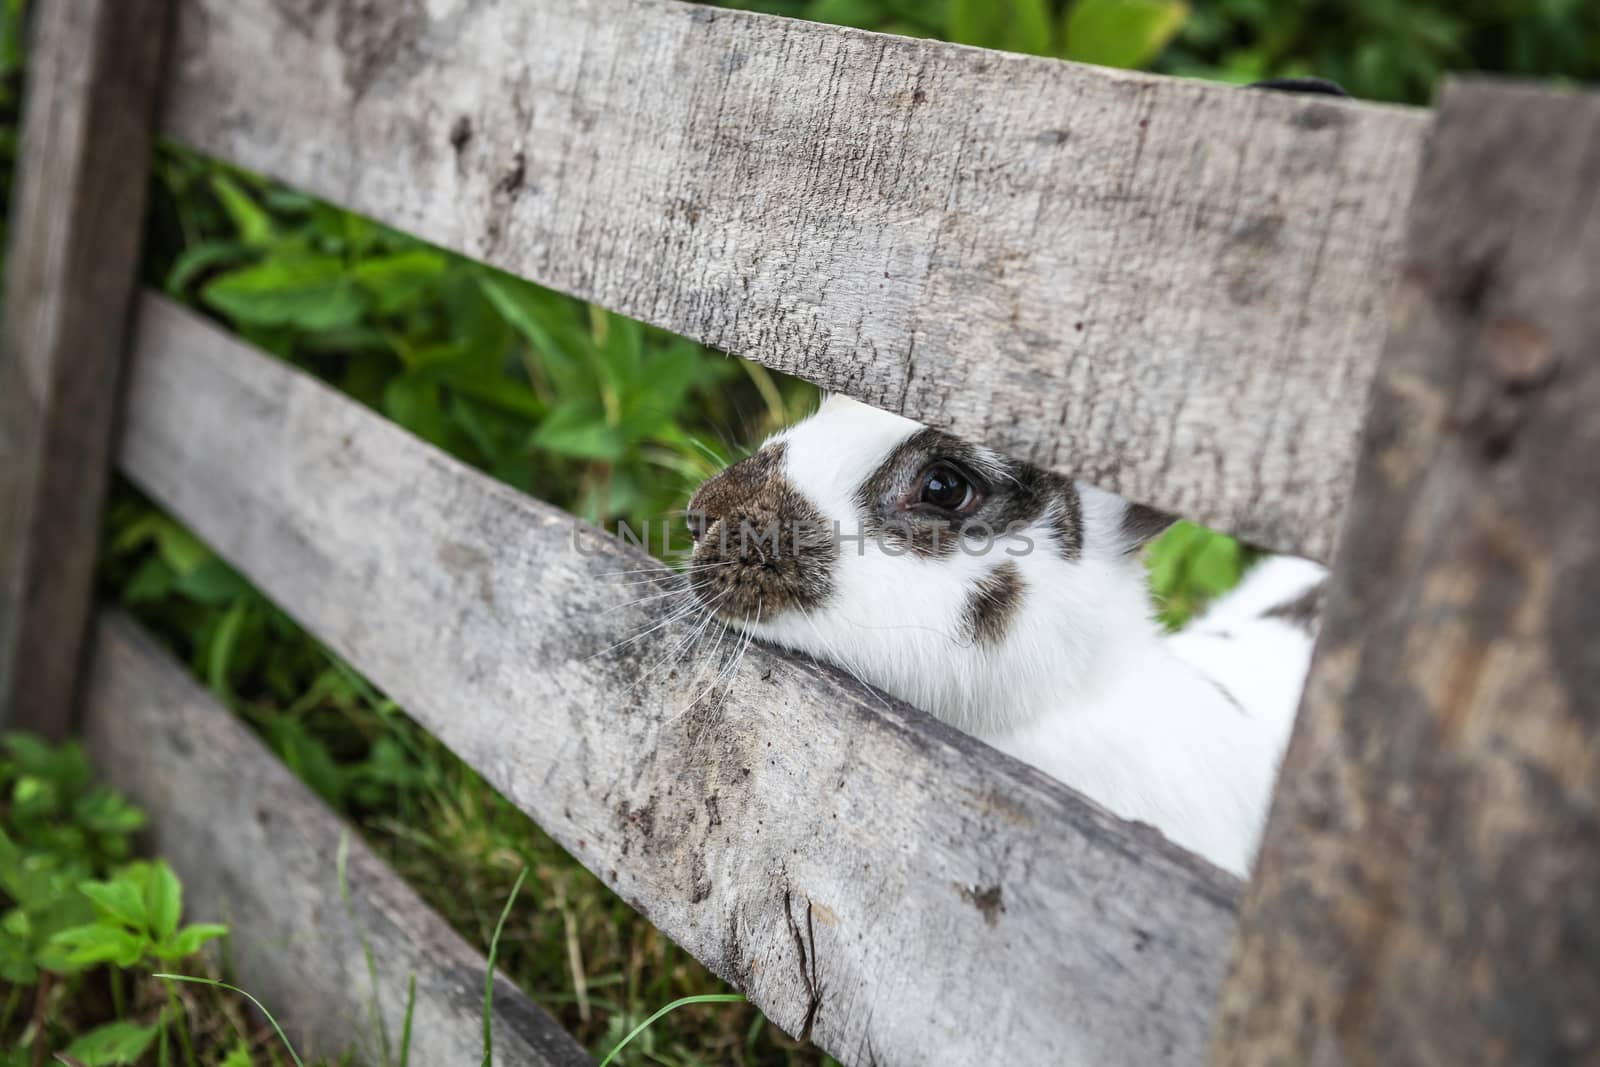 Small rabbit peeking from behind the fence.